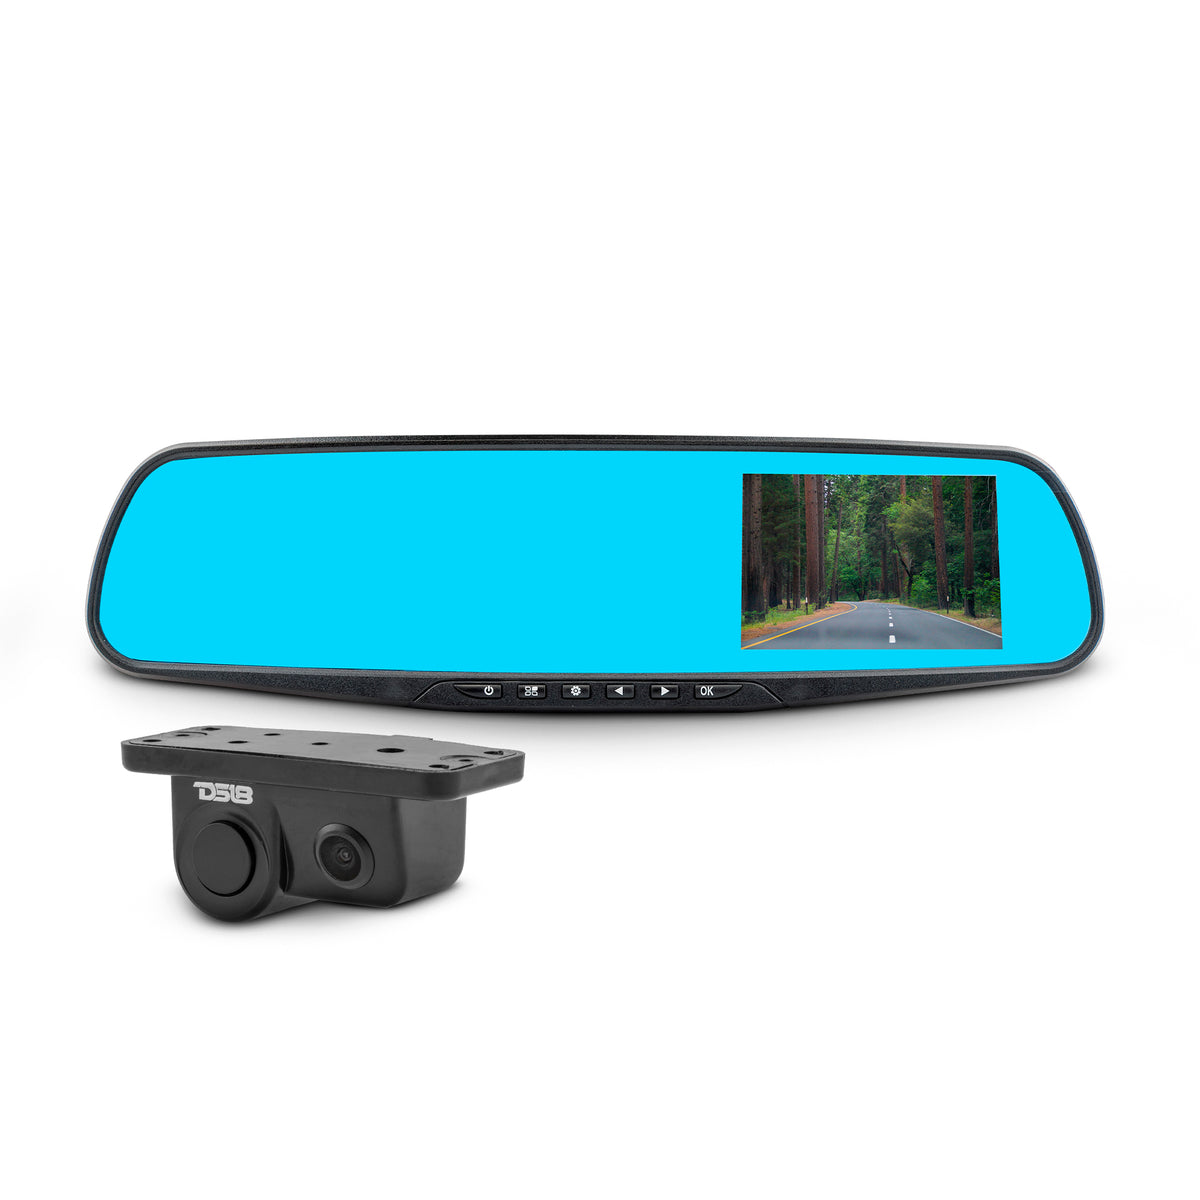 DS18 EAGLE2IN1 Rearview Mirror with 4.3" HD LCD Display Built-In 1080P Dash Cam Recorder, Reverse Camera with Parking Sensor